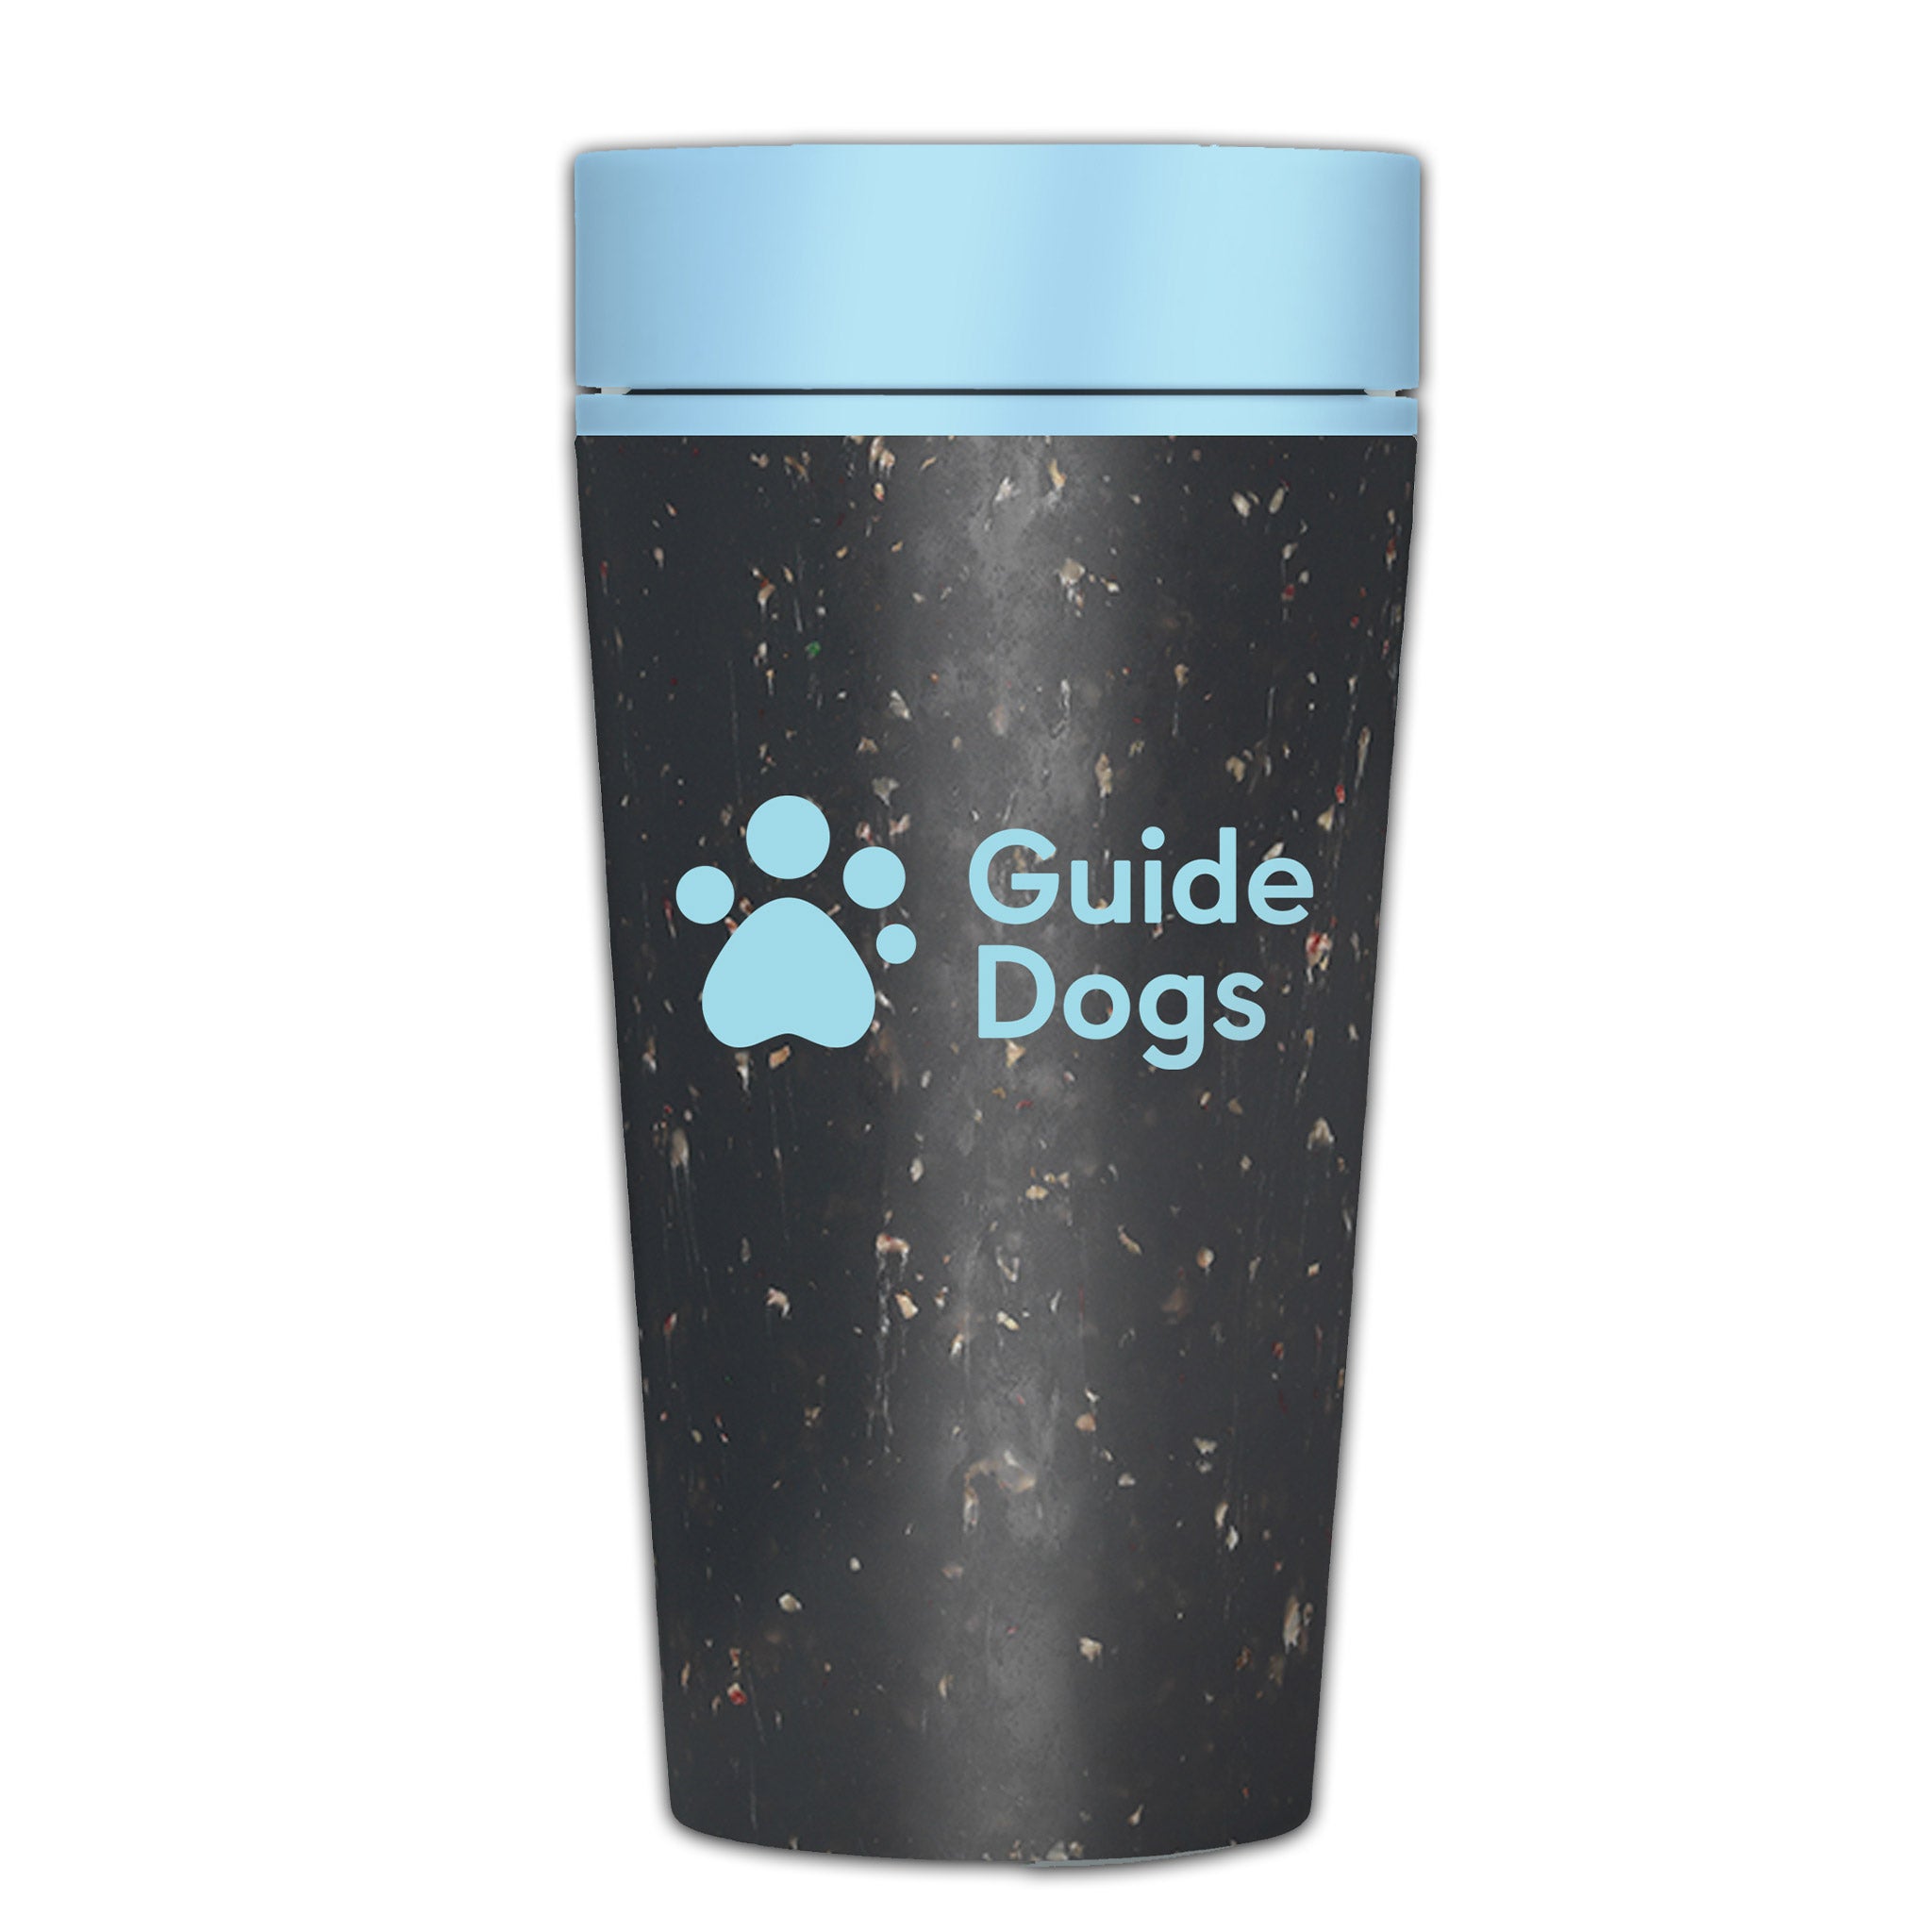 A close up of a reusale coffee cup, with black sides and a light blue top. The Guide Dogs logo is also printed on the side in light blue.